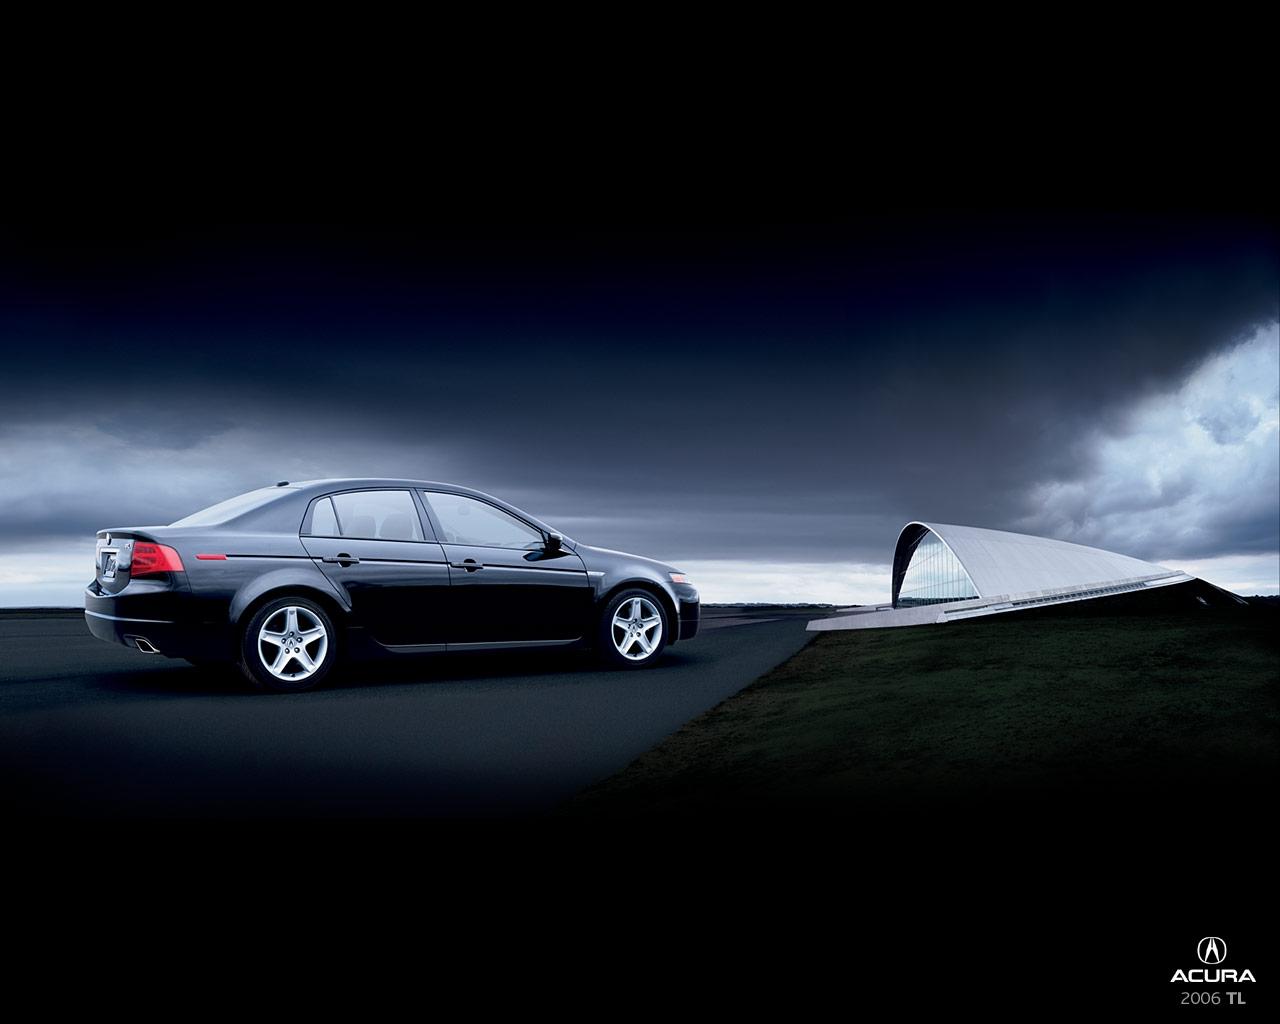 Acura Cl Wallpaper HD Photo, Wallpaper and other Image